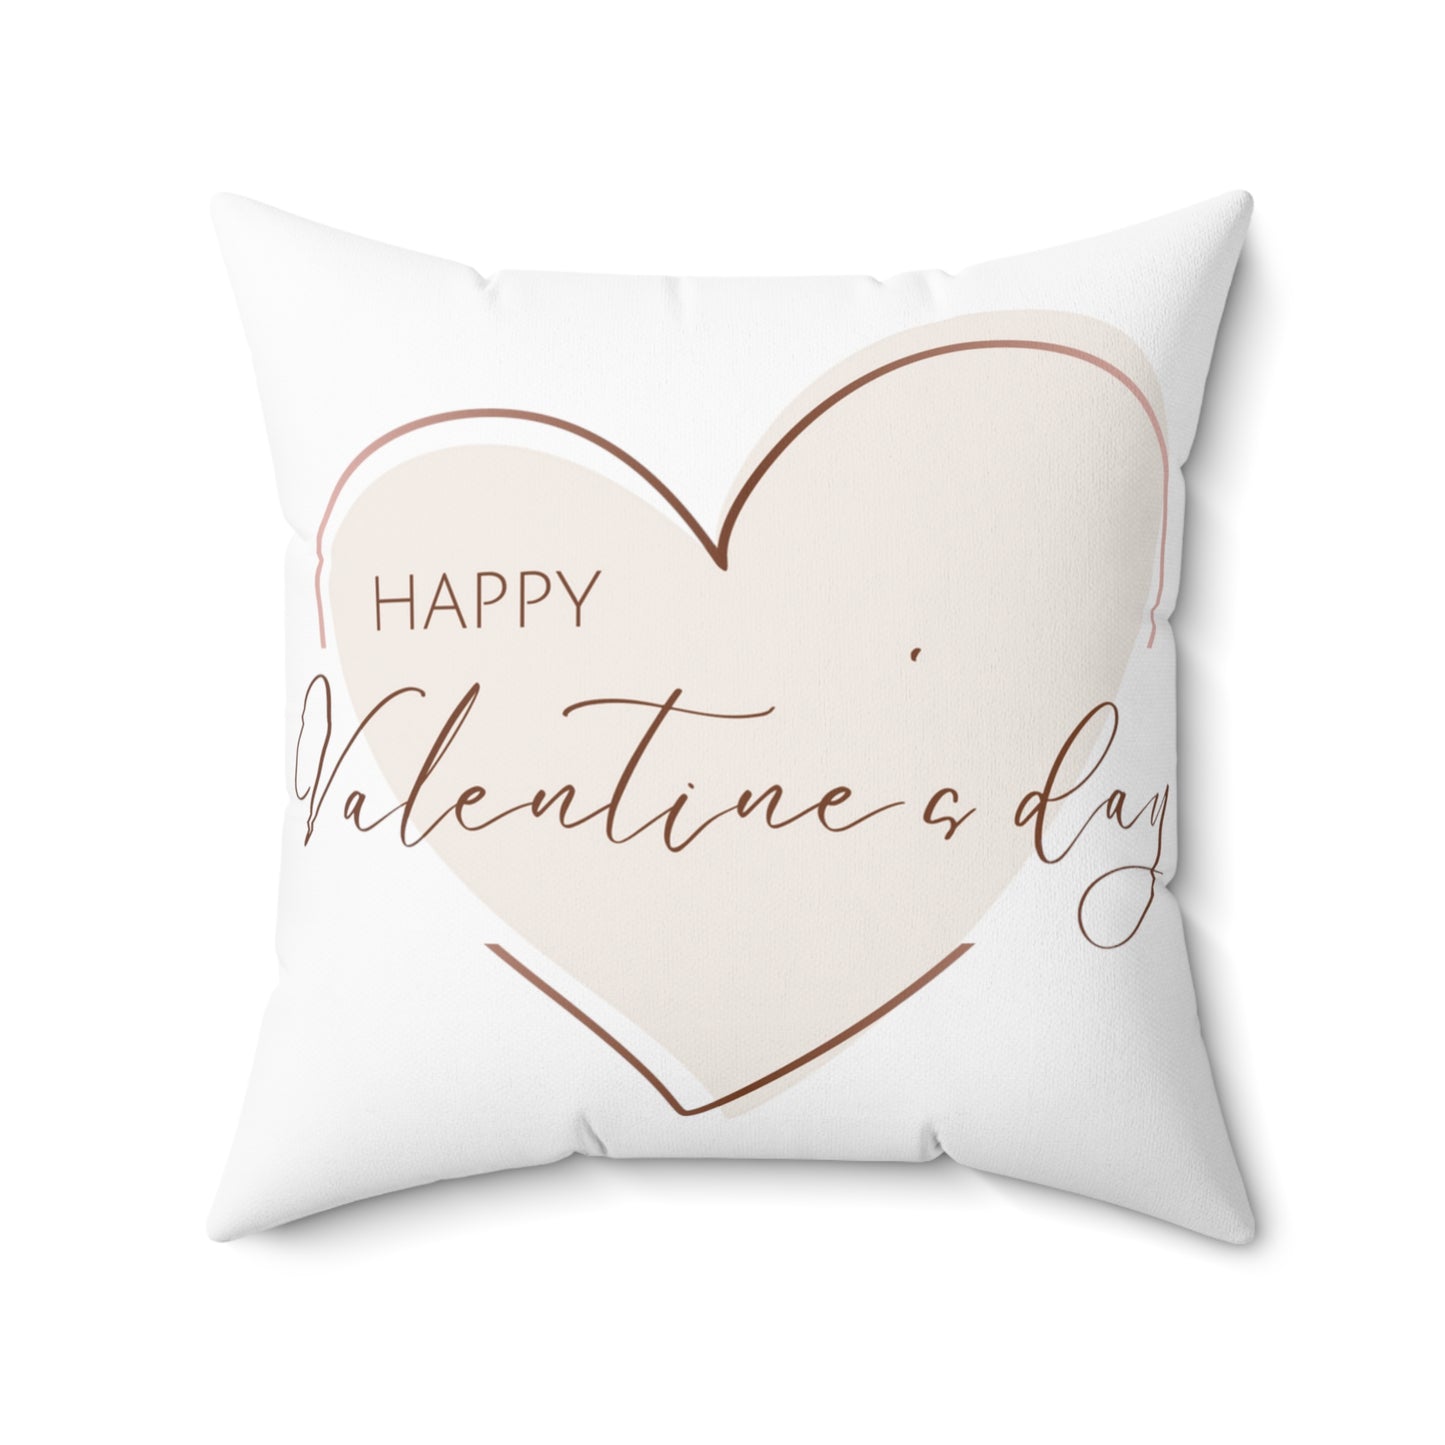 Happy Valentine inside Heart Printed Sqaure Pillow Case